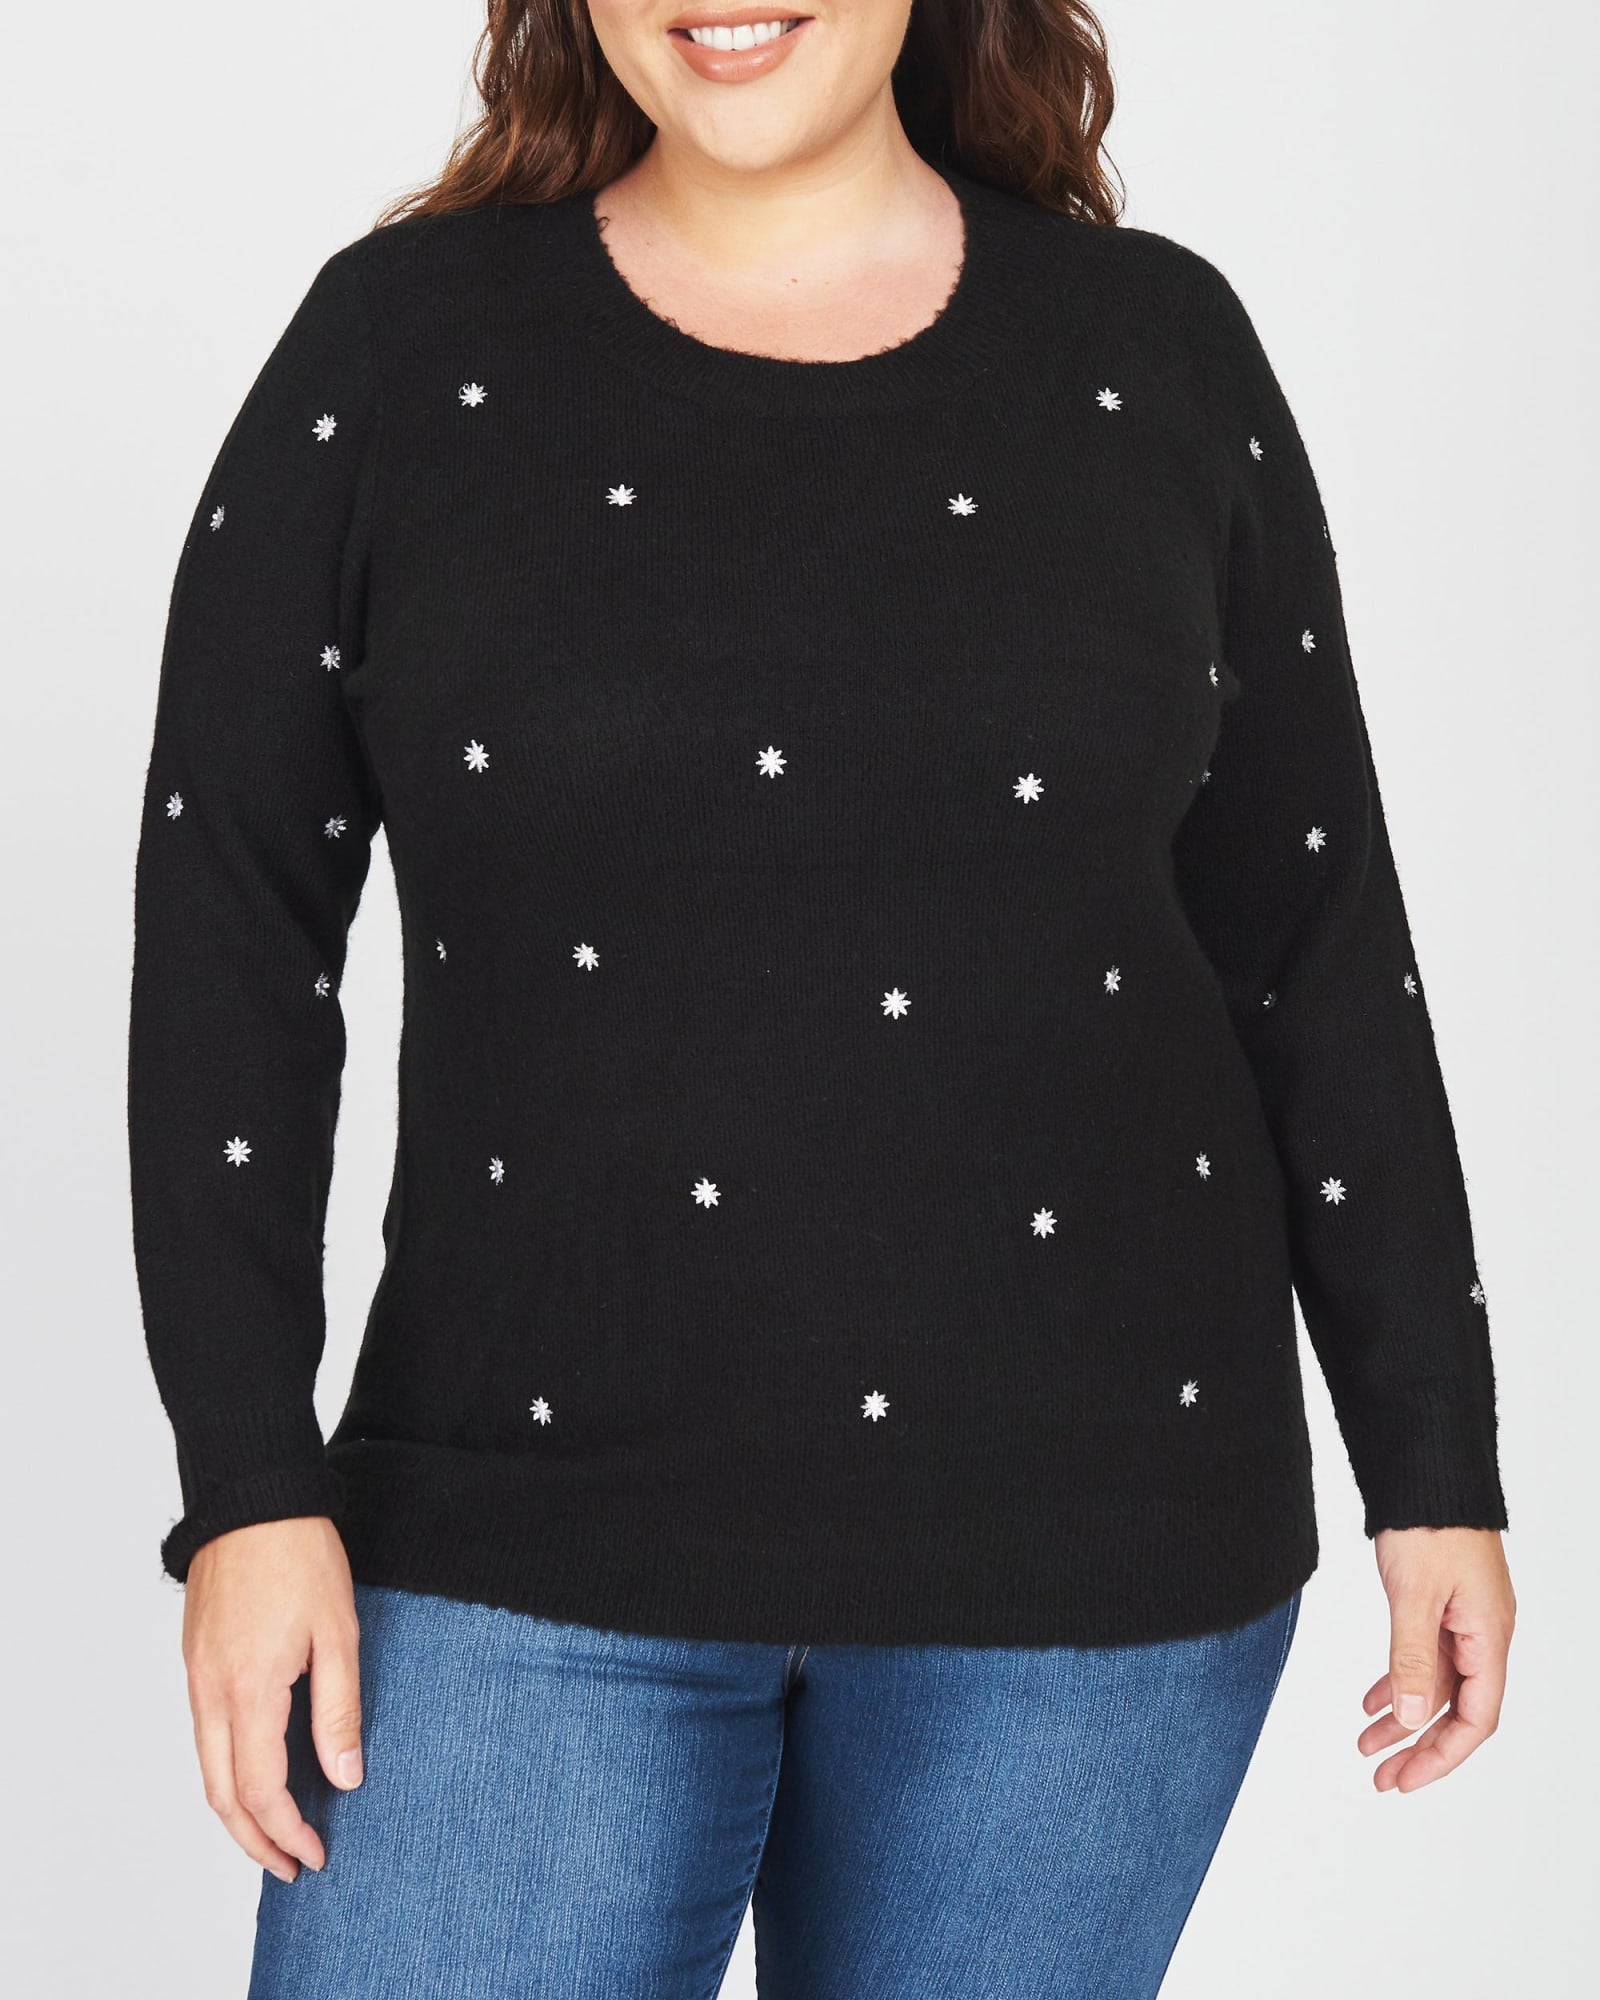 Plus Size Sparkly Sweaters